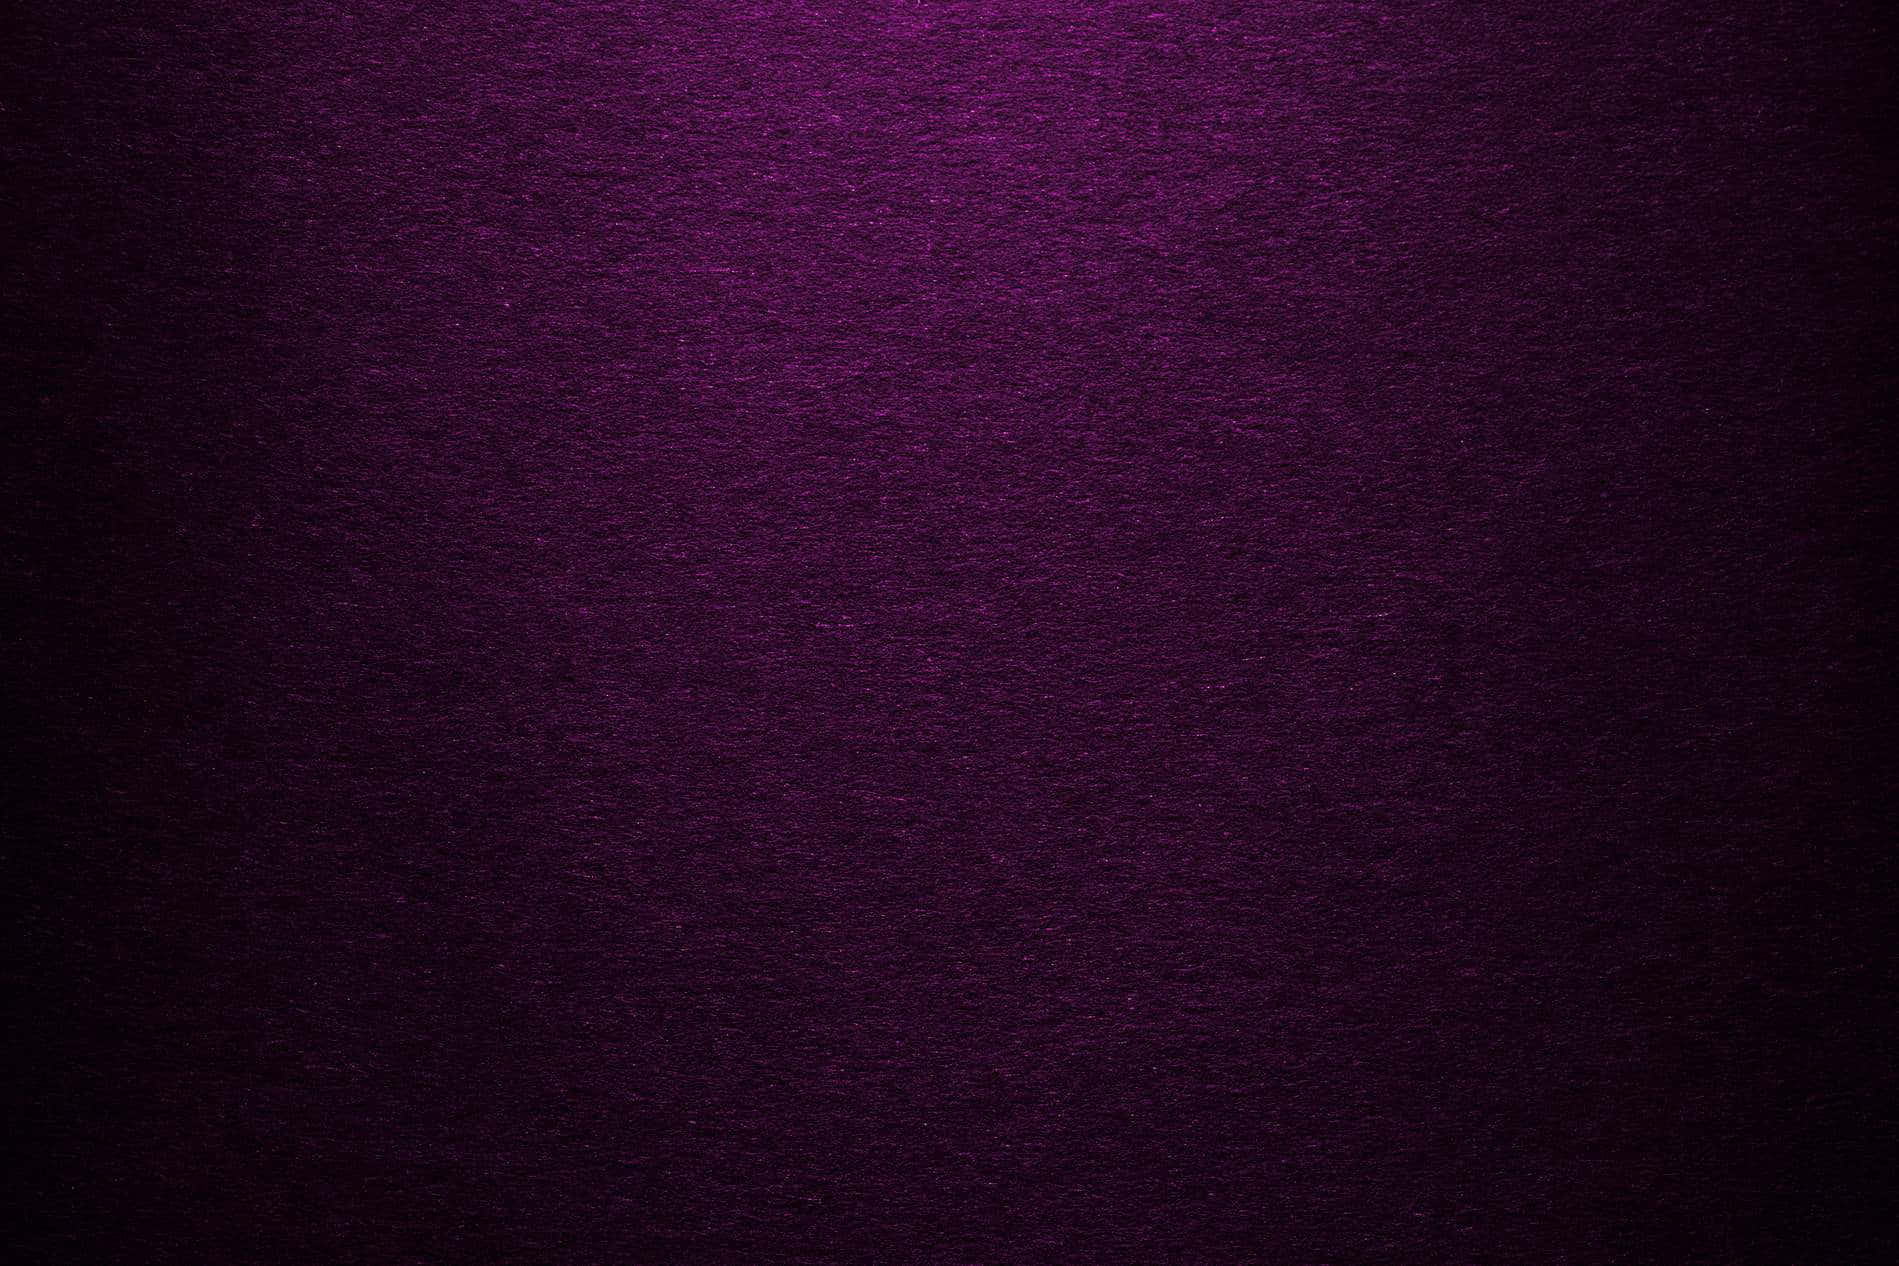 A purple texture background with a subtle ripple pattern